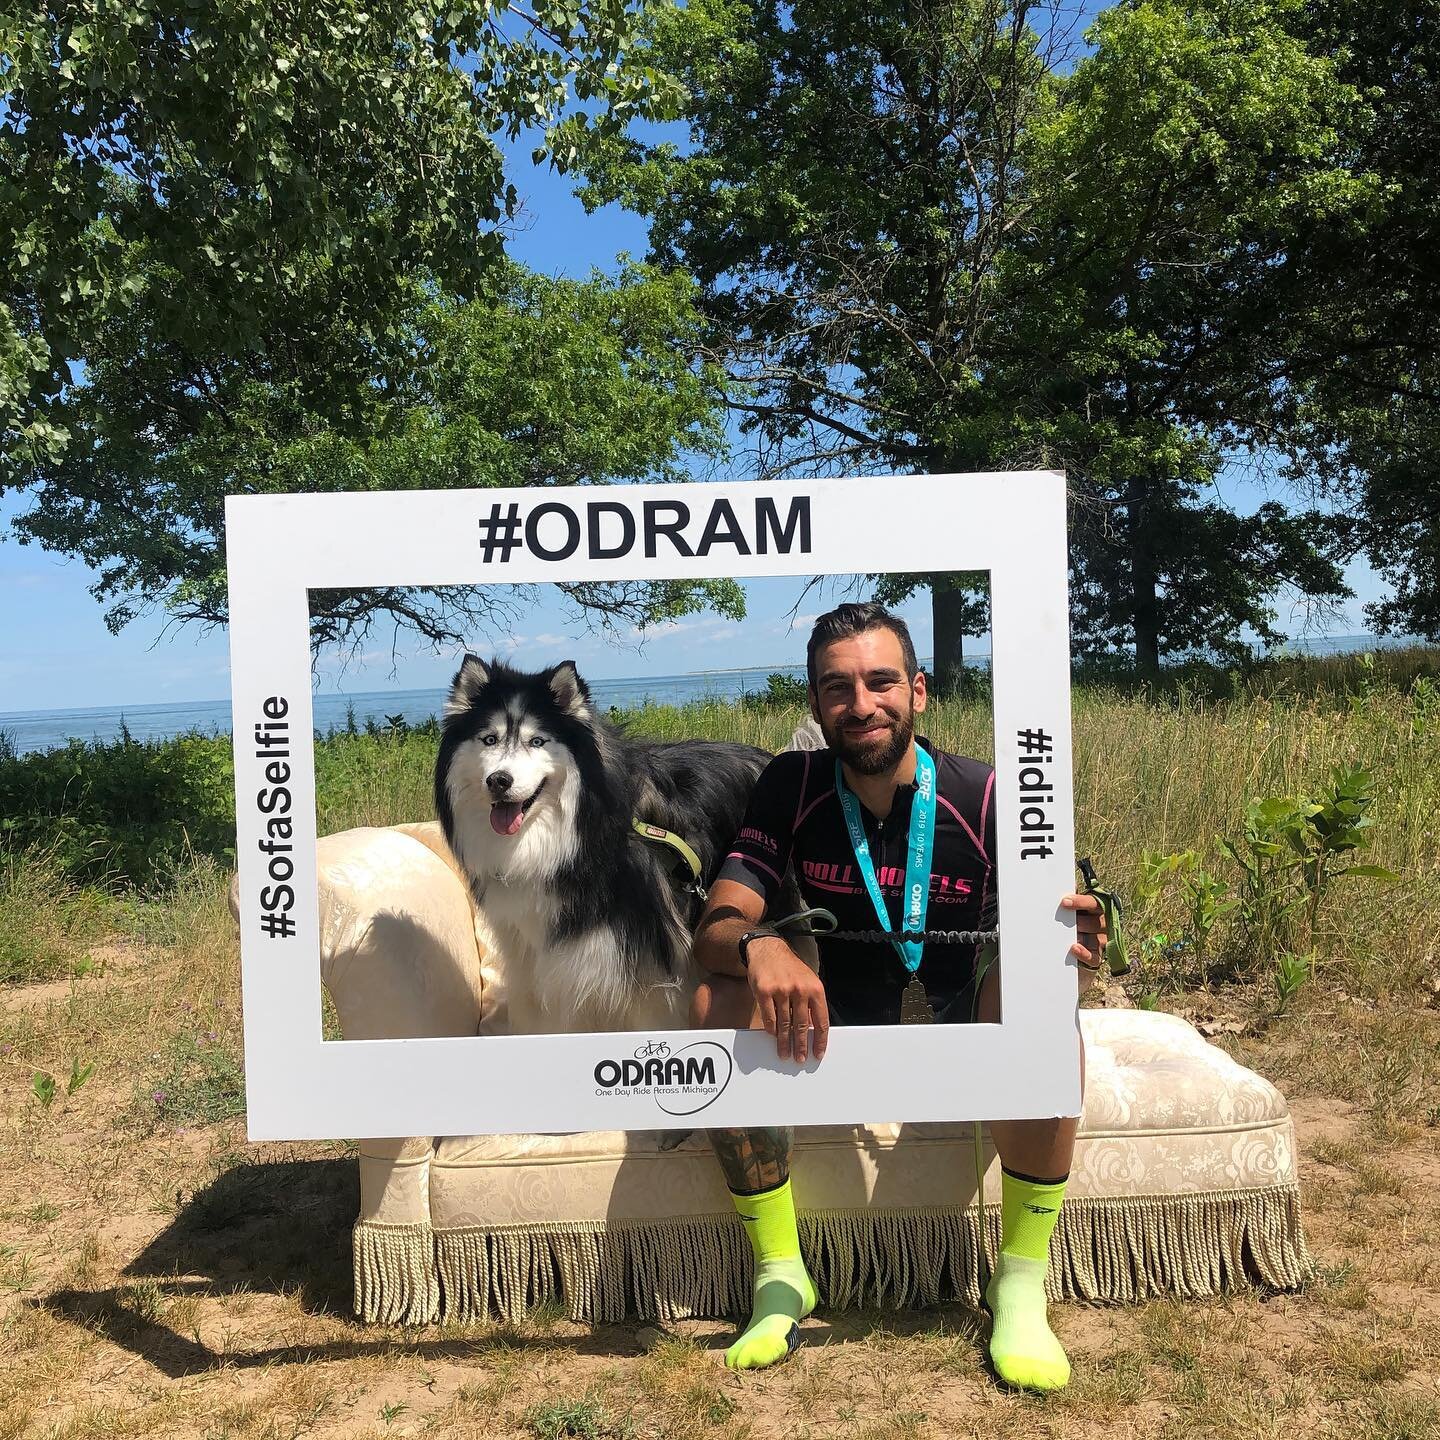 Marc recently celebrated his 30th birthday by riding his bike across the state in the One Day Ride Across Michigan #ODRAM. 145 miles in 6.5 hours at nearly 23 mph average. We are staying an inside look in our Story! #cycling #onedayride #Michigan #Pu